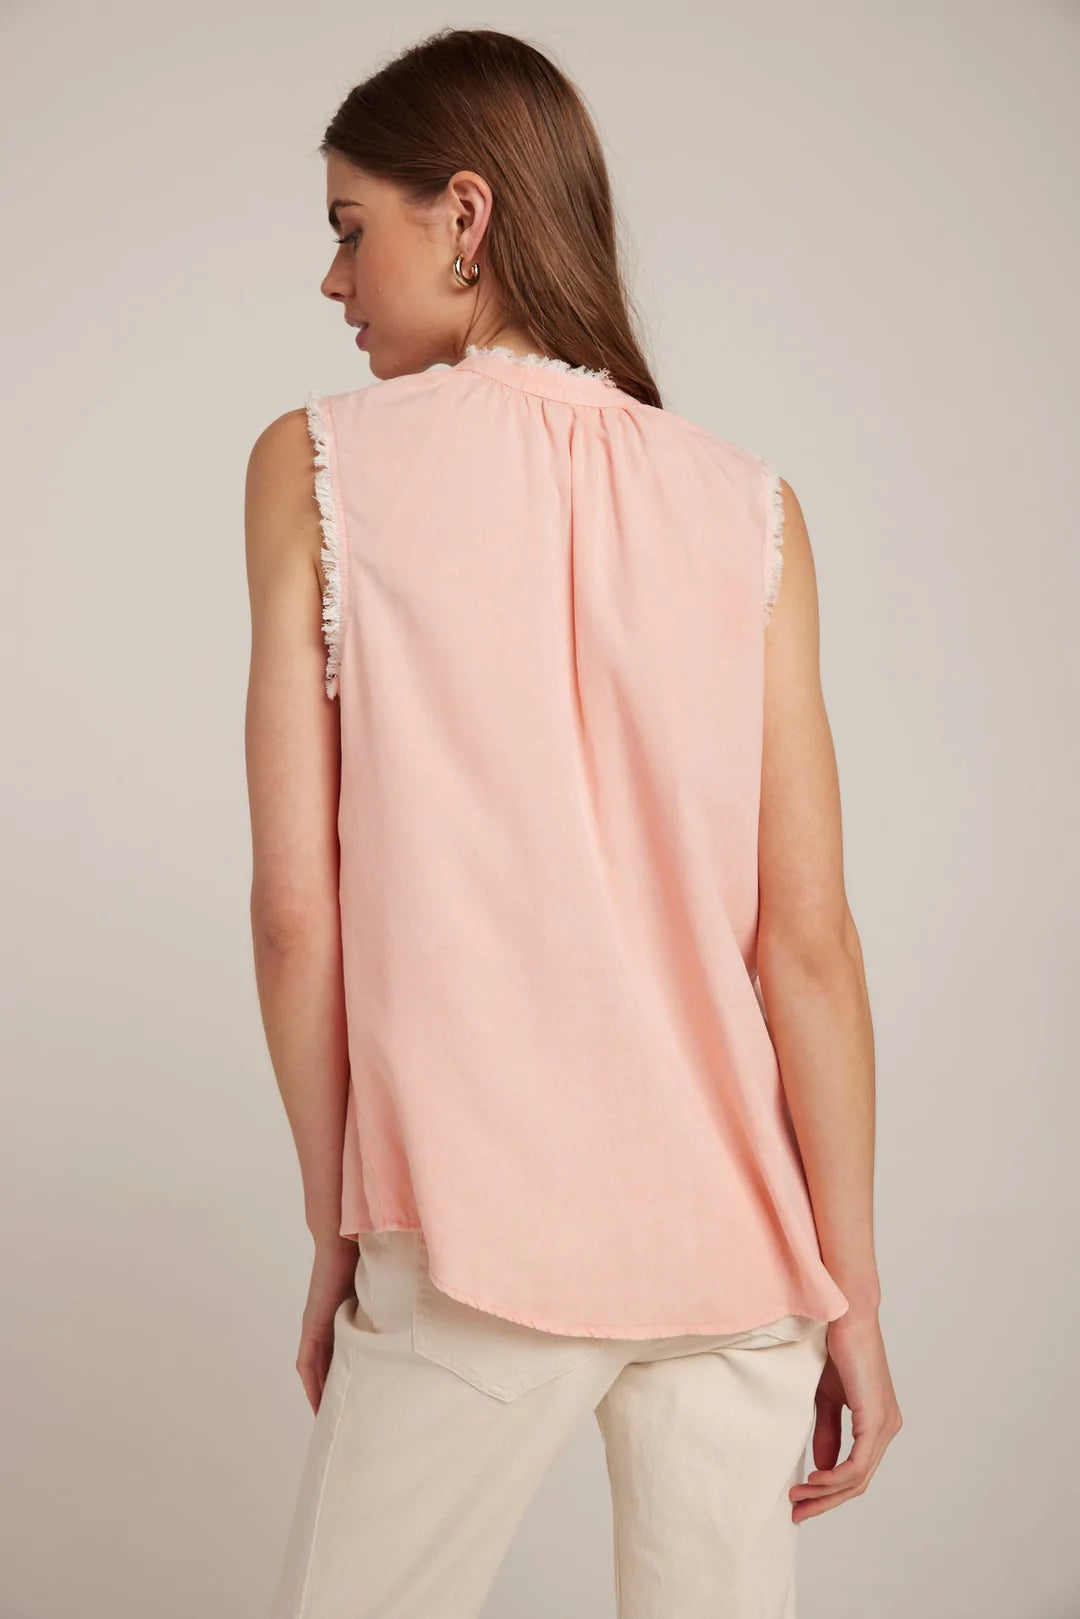 Sleeveless coral top with frayed collar and tie details